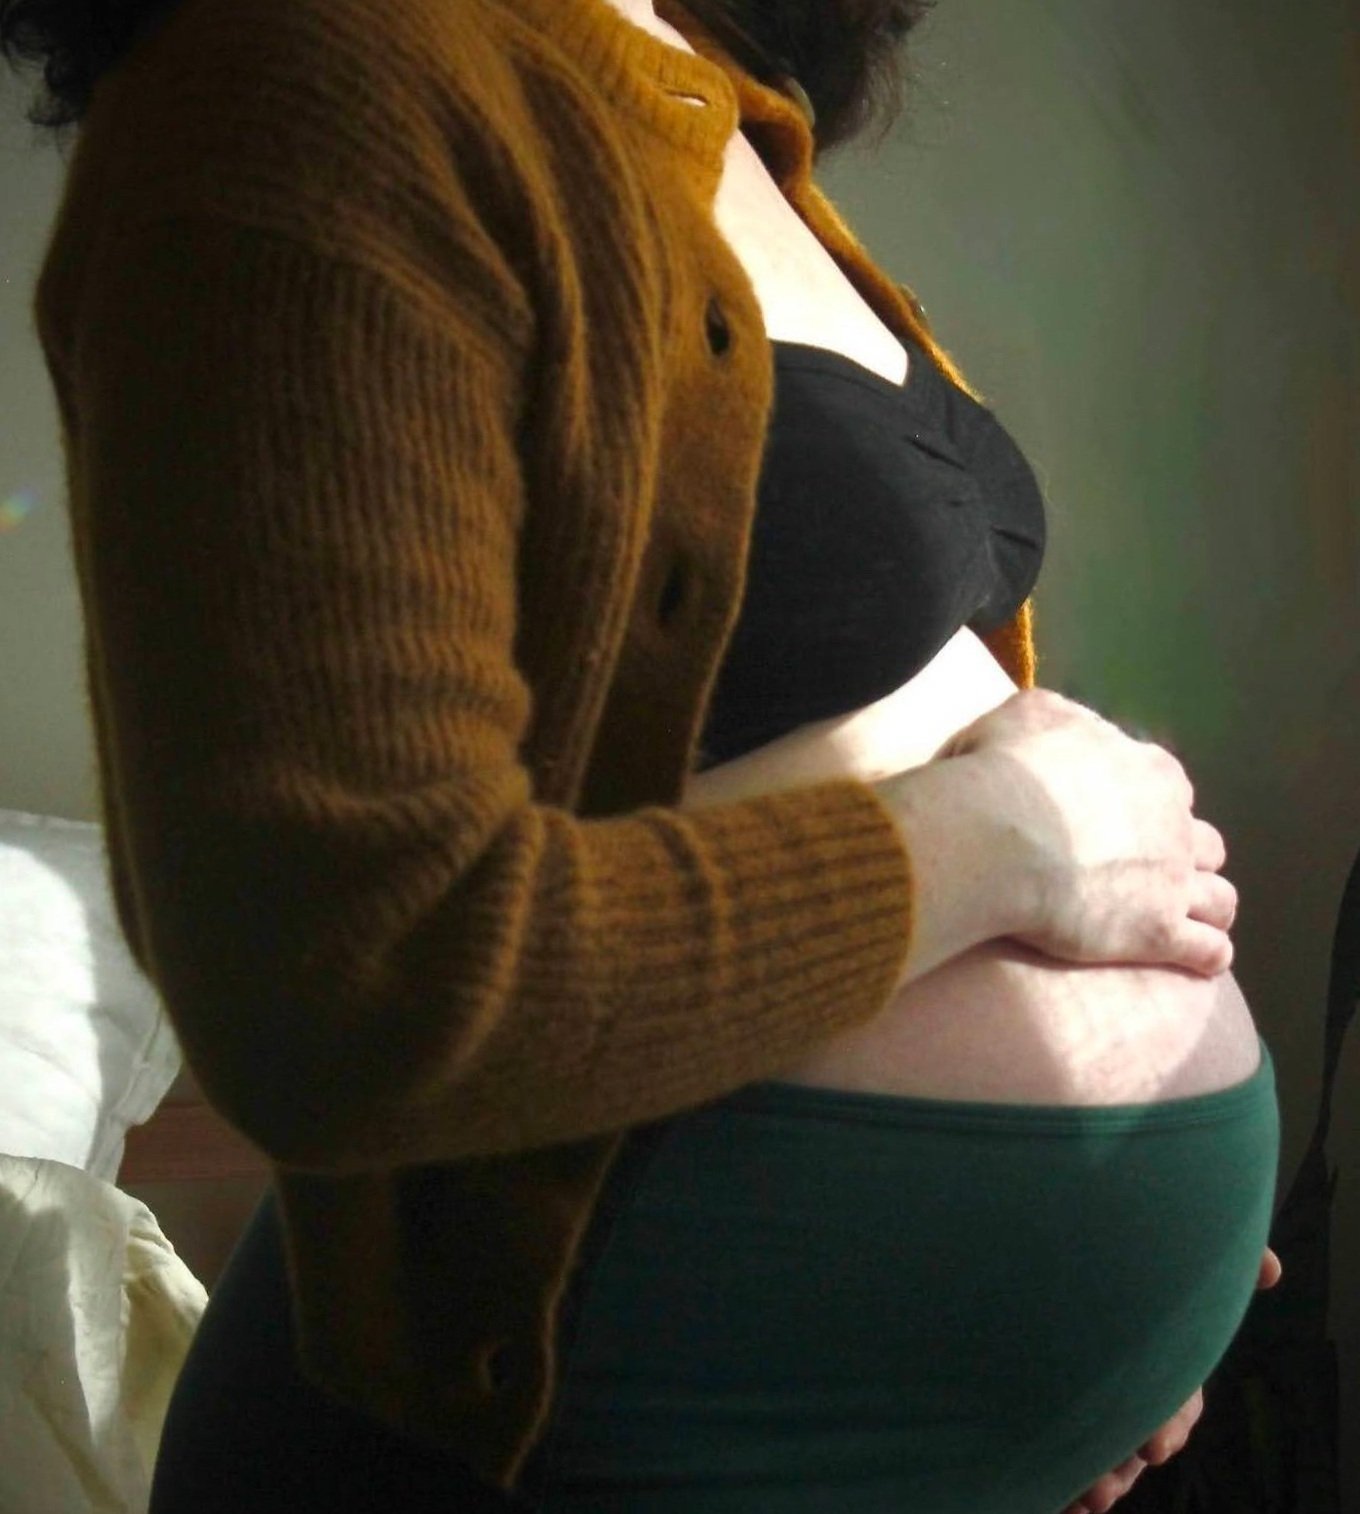 The Final Days of Pregnancy